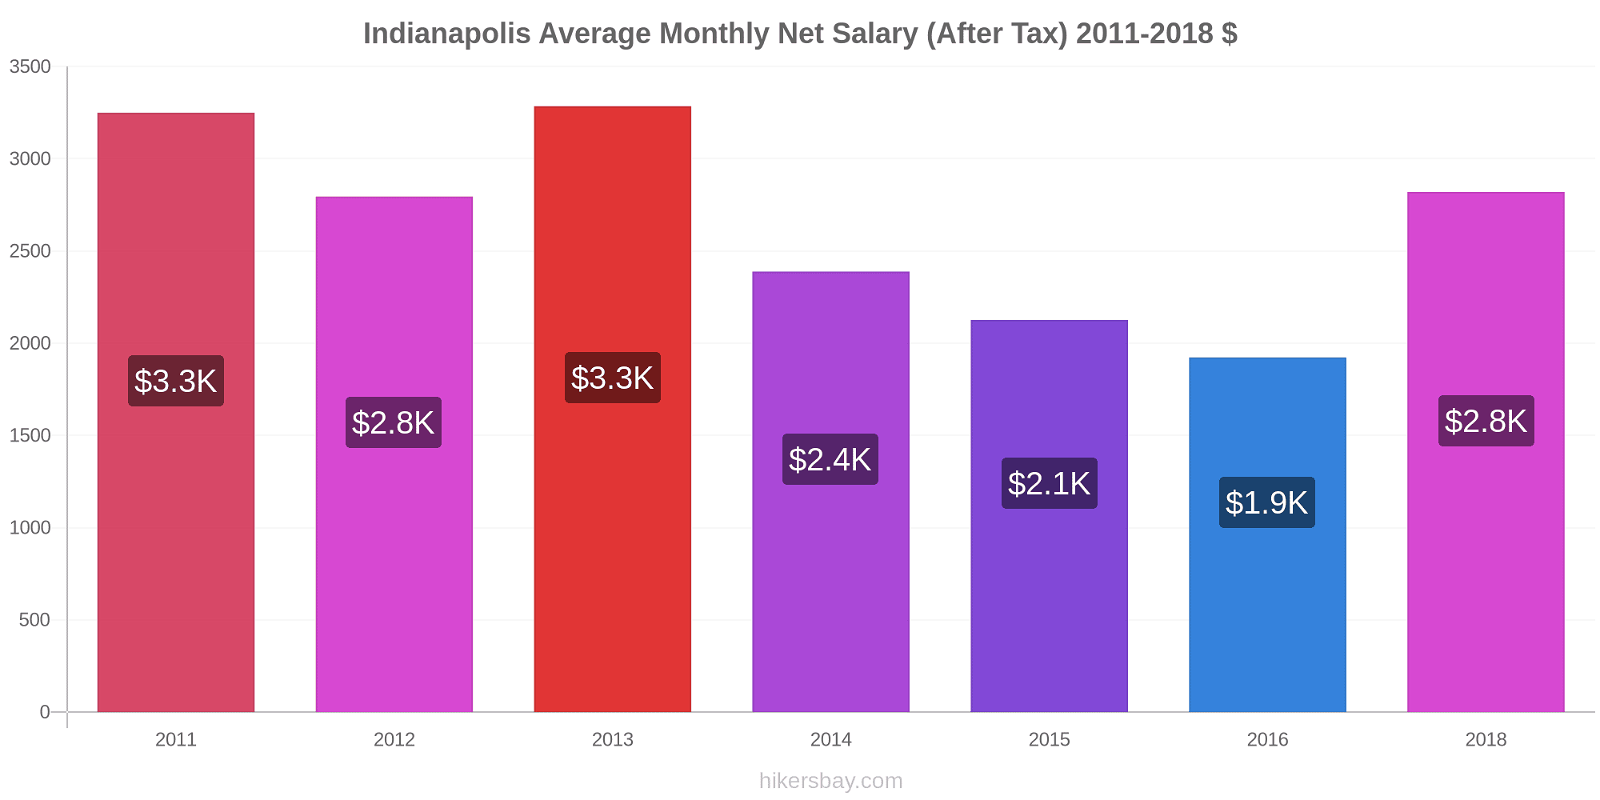 Indianapolis price changes Average Monthly Net Salary (After Tax) hikersbay.com